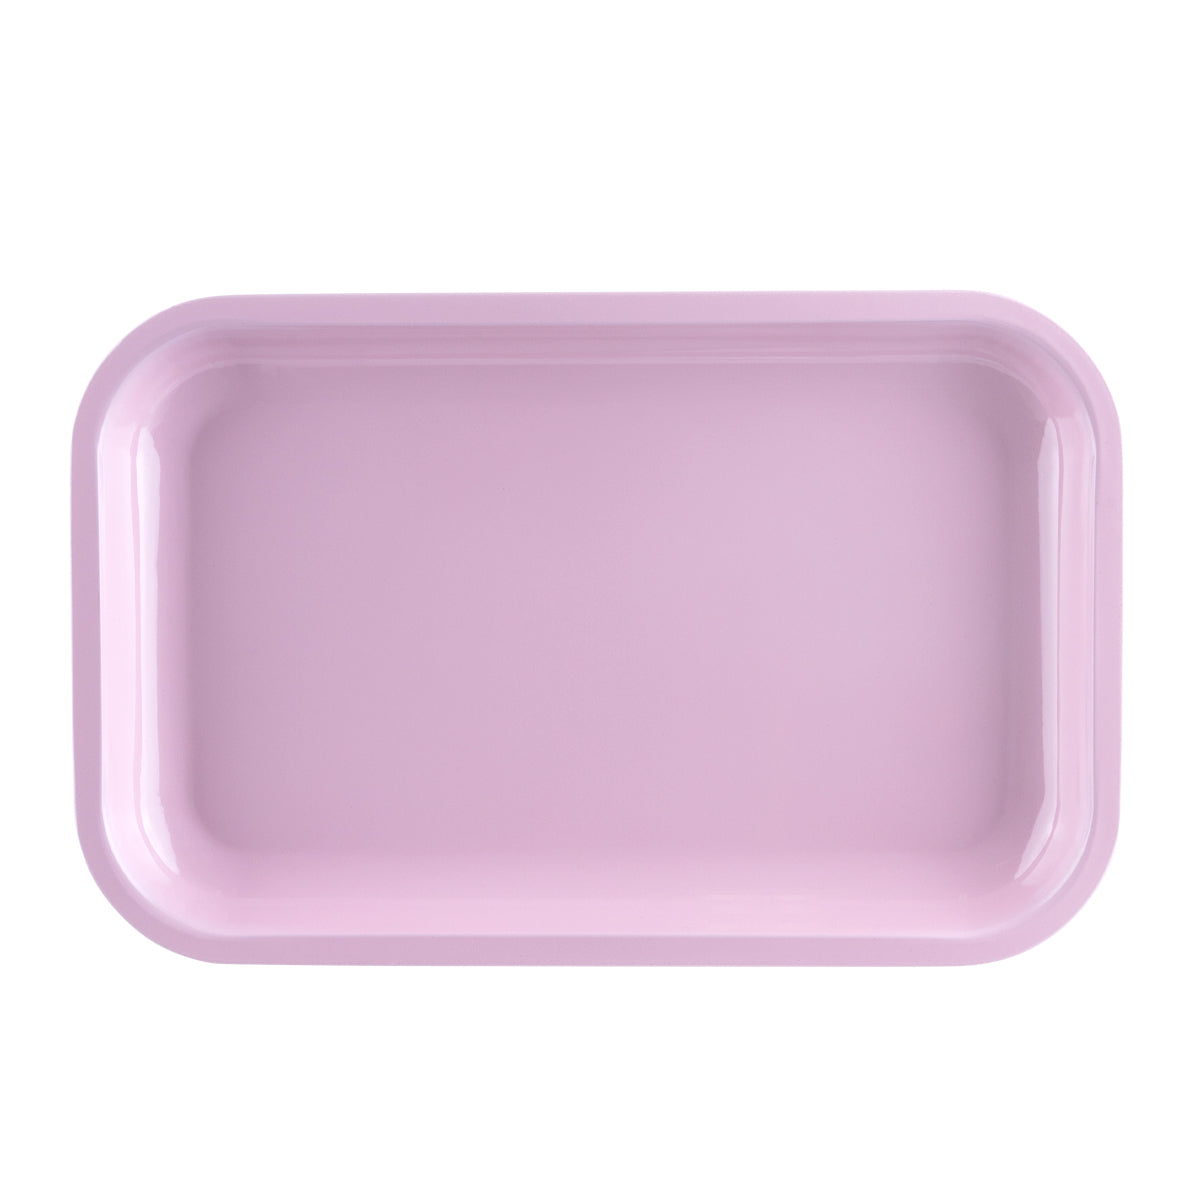 Rolling Tray | Metal Tray w/ Magnetic Lid | Large - Various Colors Rolling Tray Biohazard Inc Pink  